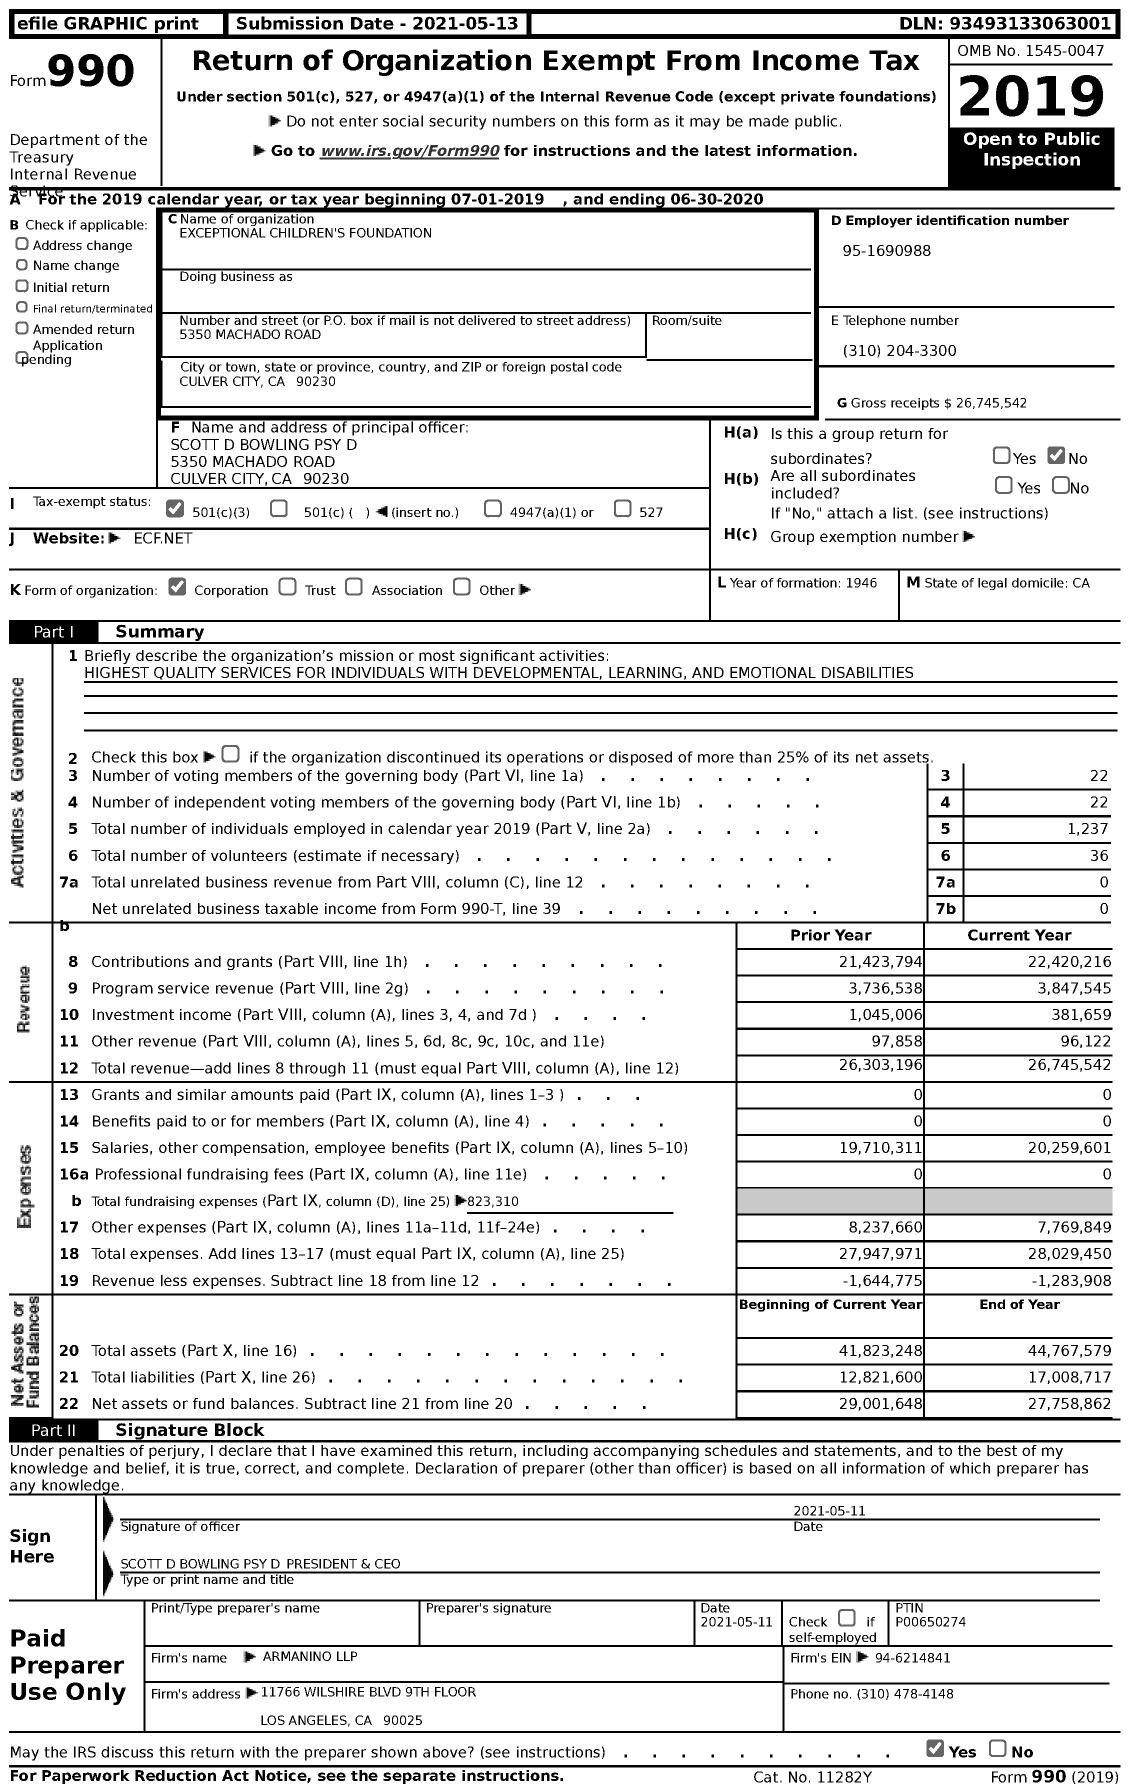 Image of first page of 2019 Form 990 for Exceptional Children's Foundation (ECF)